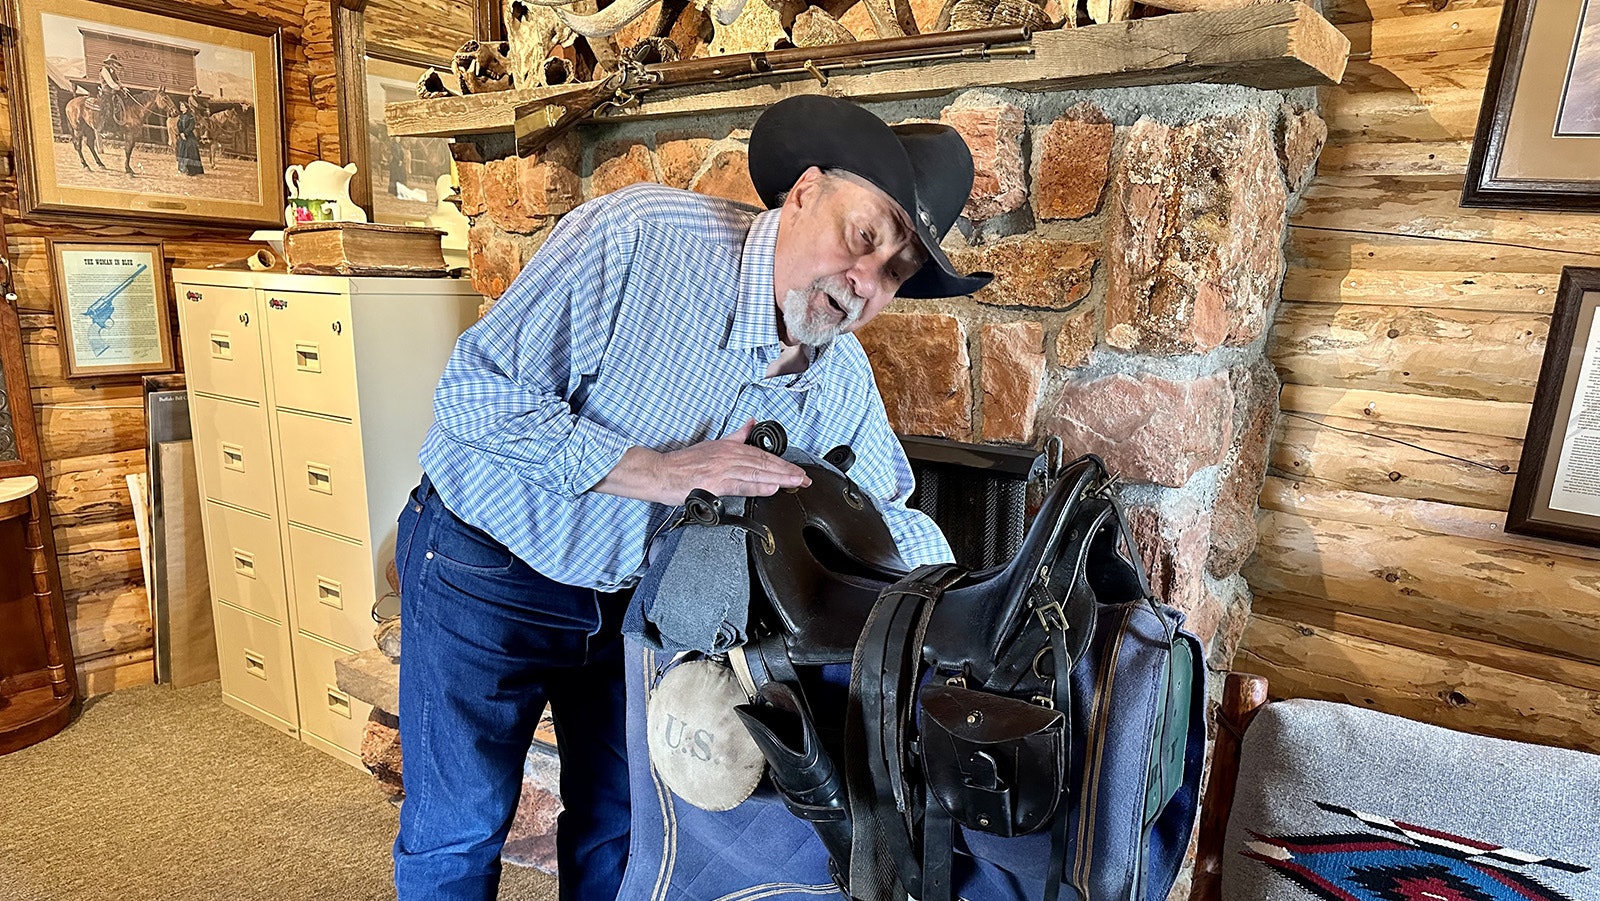 Old Trail Town's Treasurer Larry Edgar shows off an 1875 U.S. Calvary saddle recently donated to the museum. Old Trail Town is owned and operated by the nonprofit Museum of the Old West, founded by Larry's brother, Bob Edgar.